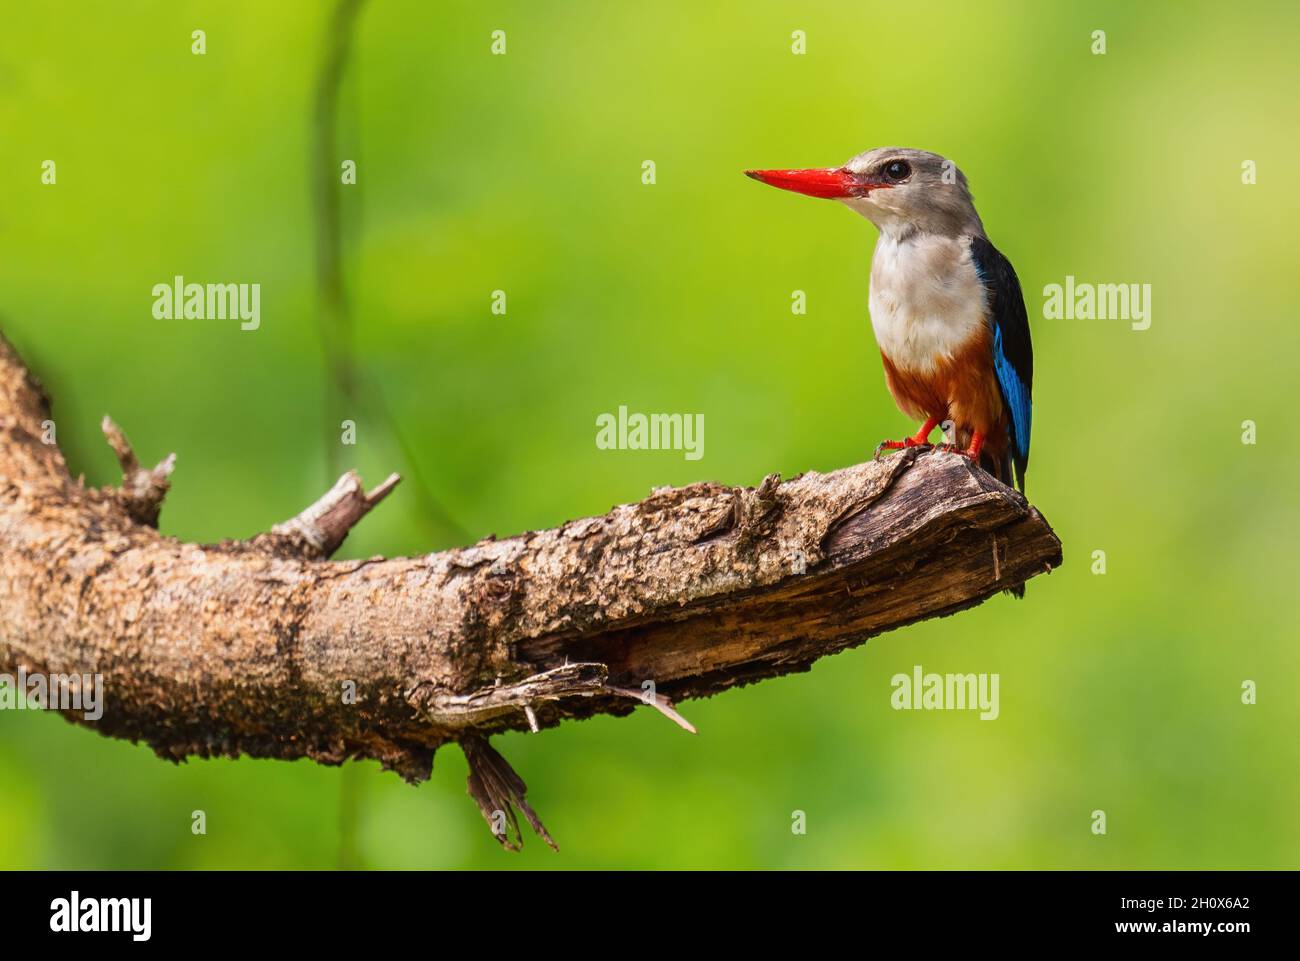 Grey-headed Kingfisher - Halcyon leucocephala, beautiful colored kingfisher from African rivers and lakes, Queen Elizabeth National Park, Uganda. Stock Photo